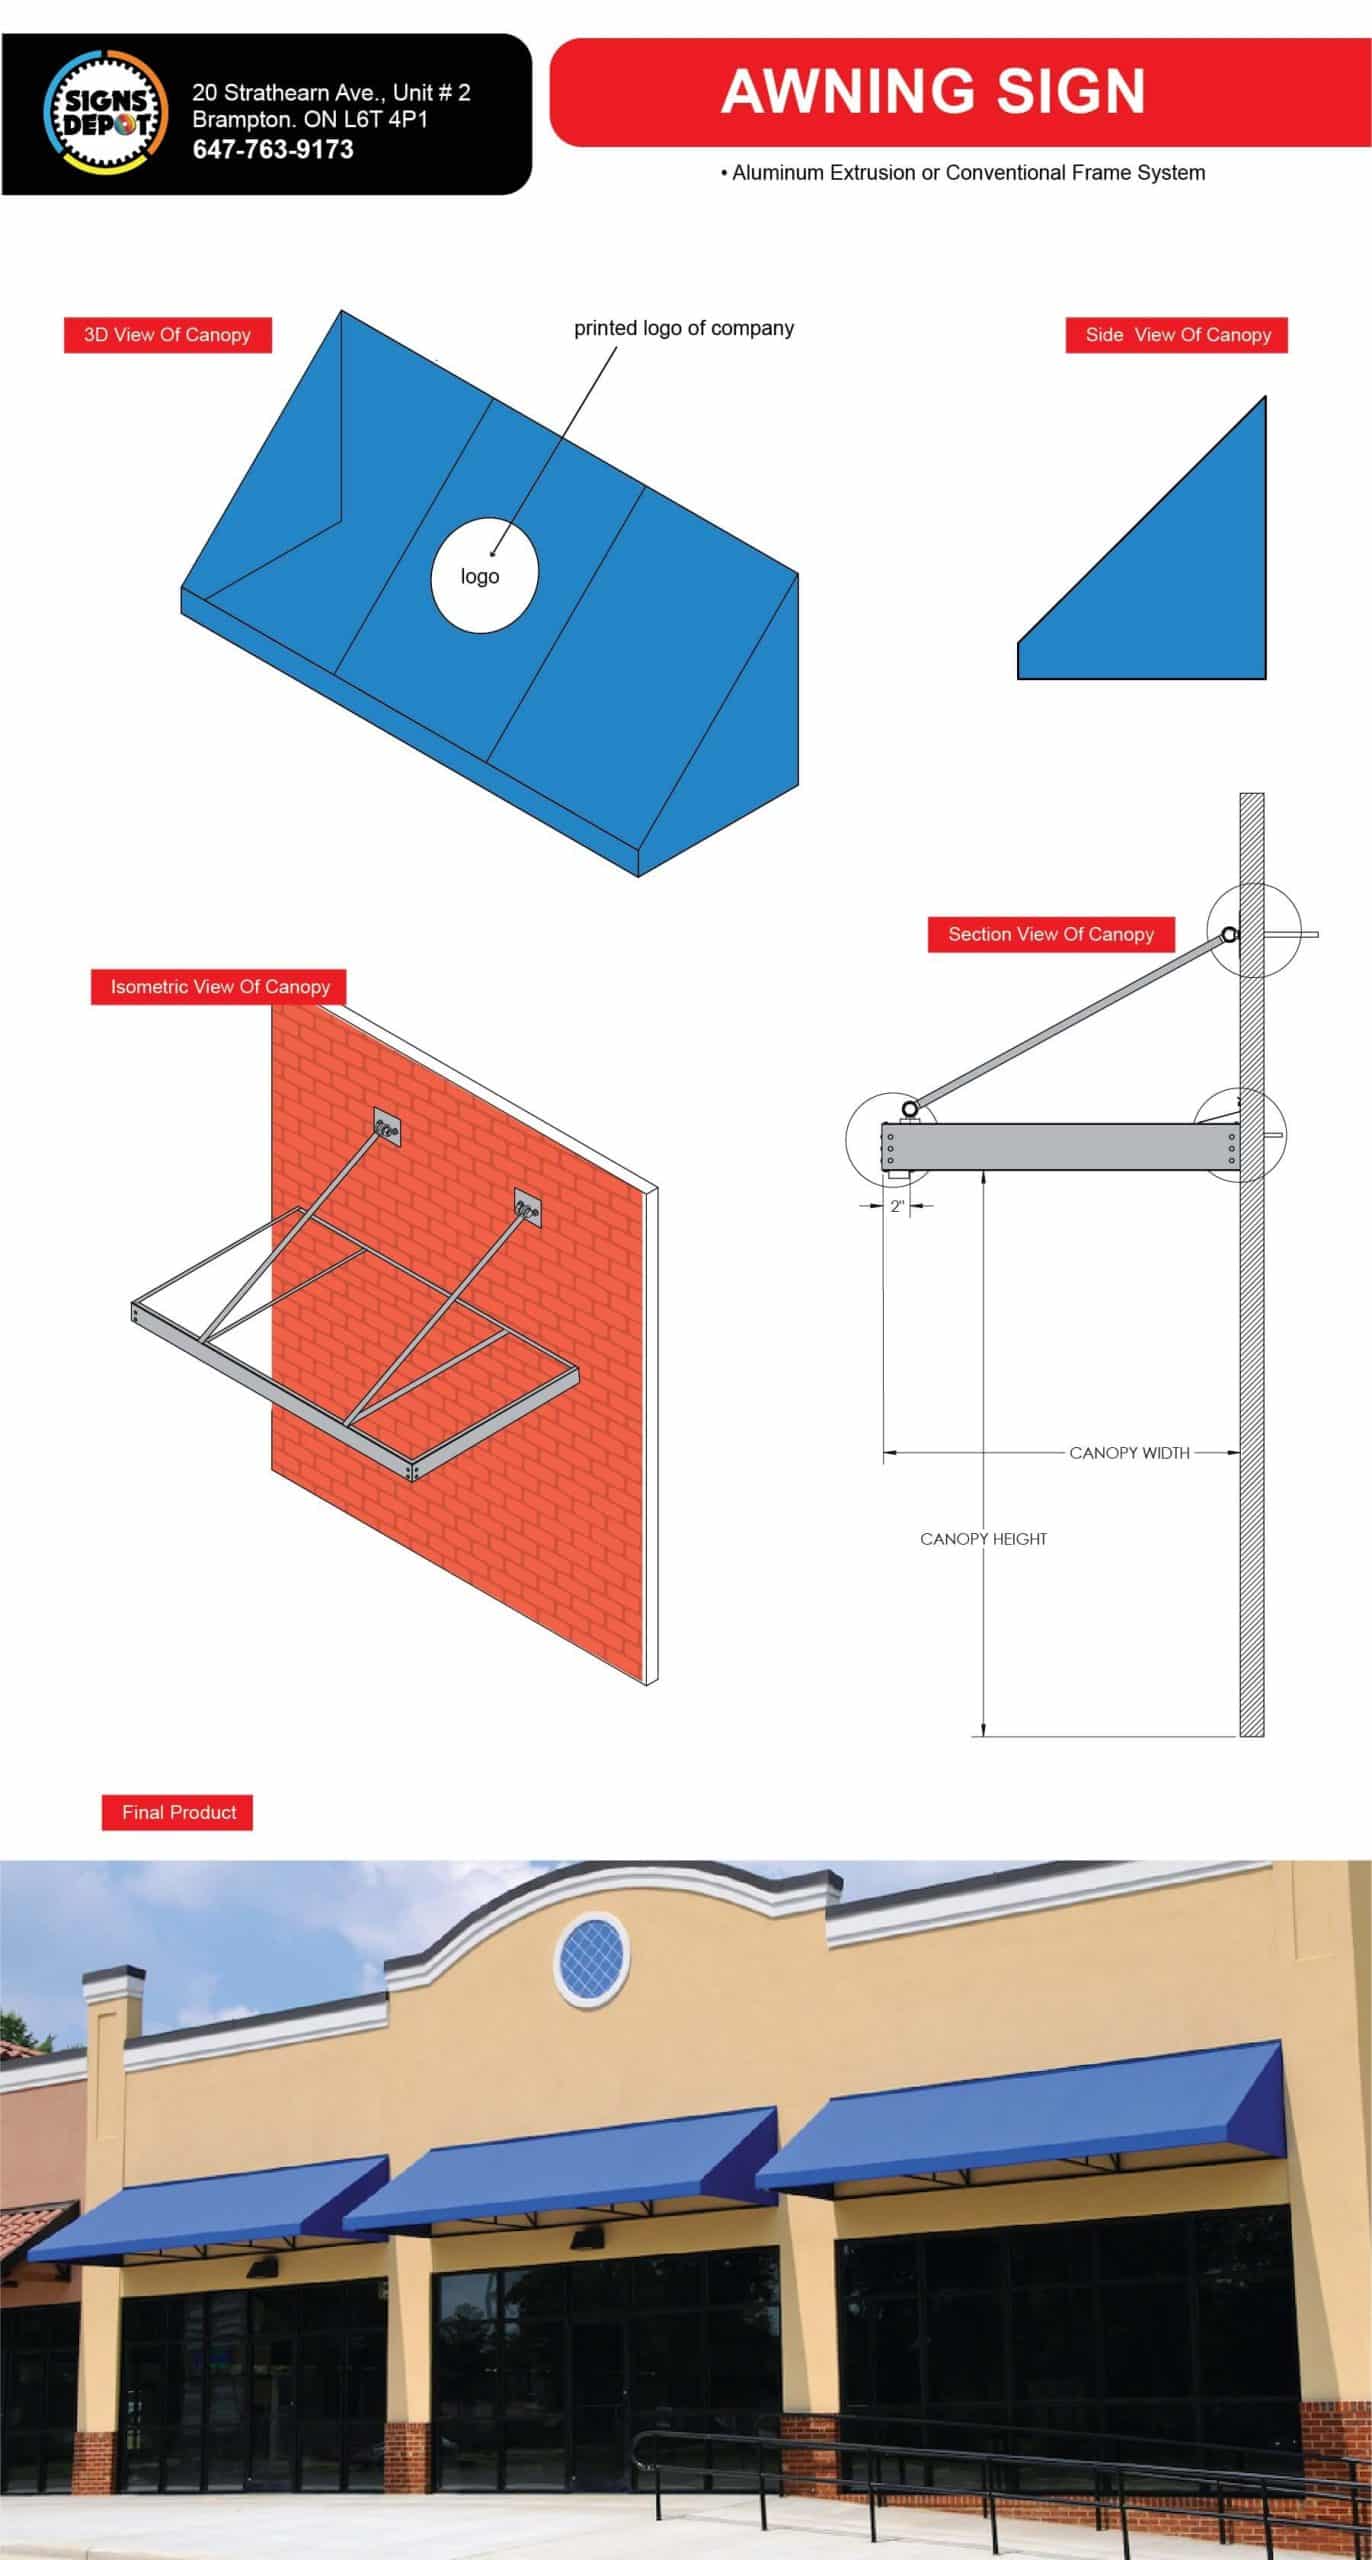 Infographic of Awning Sign in Brampton